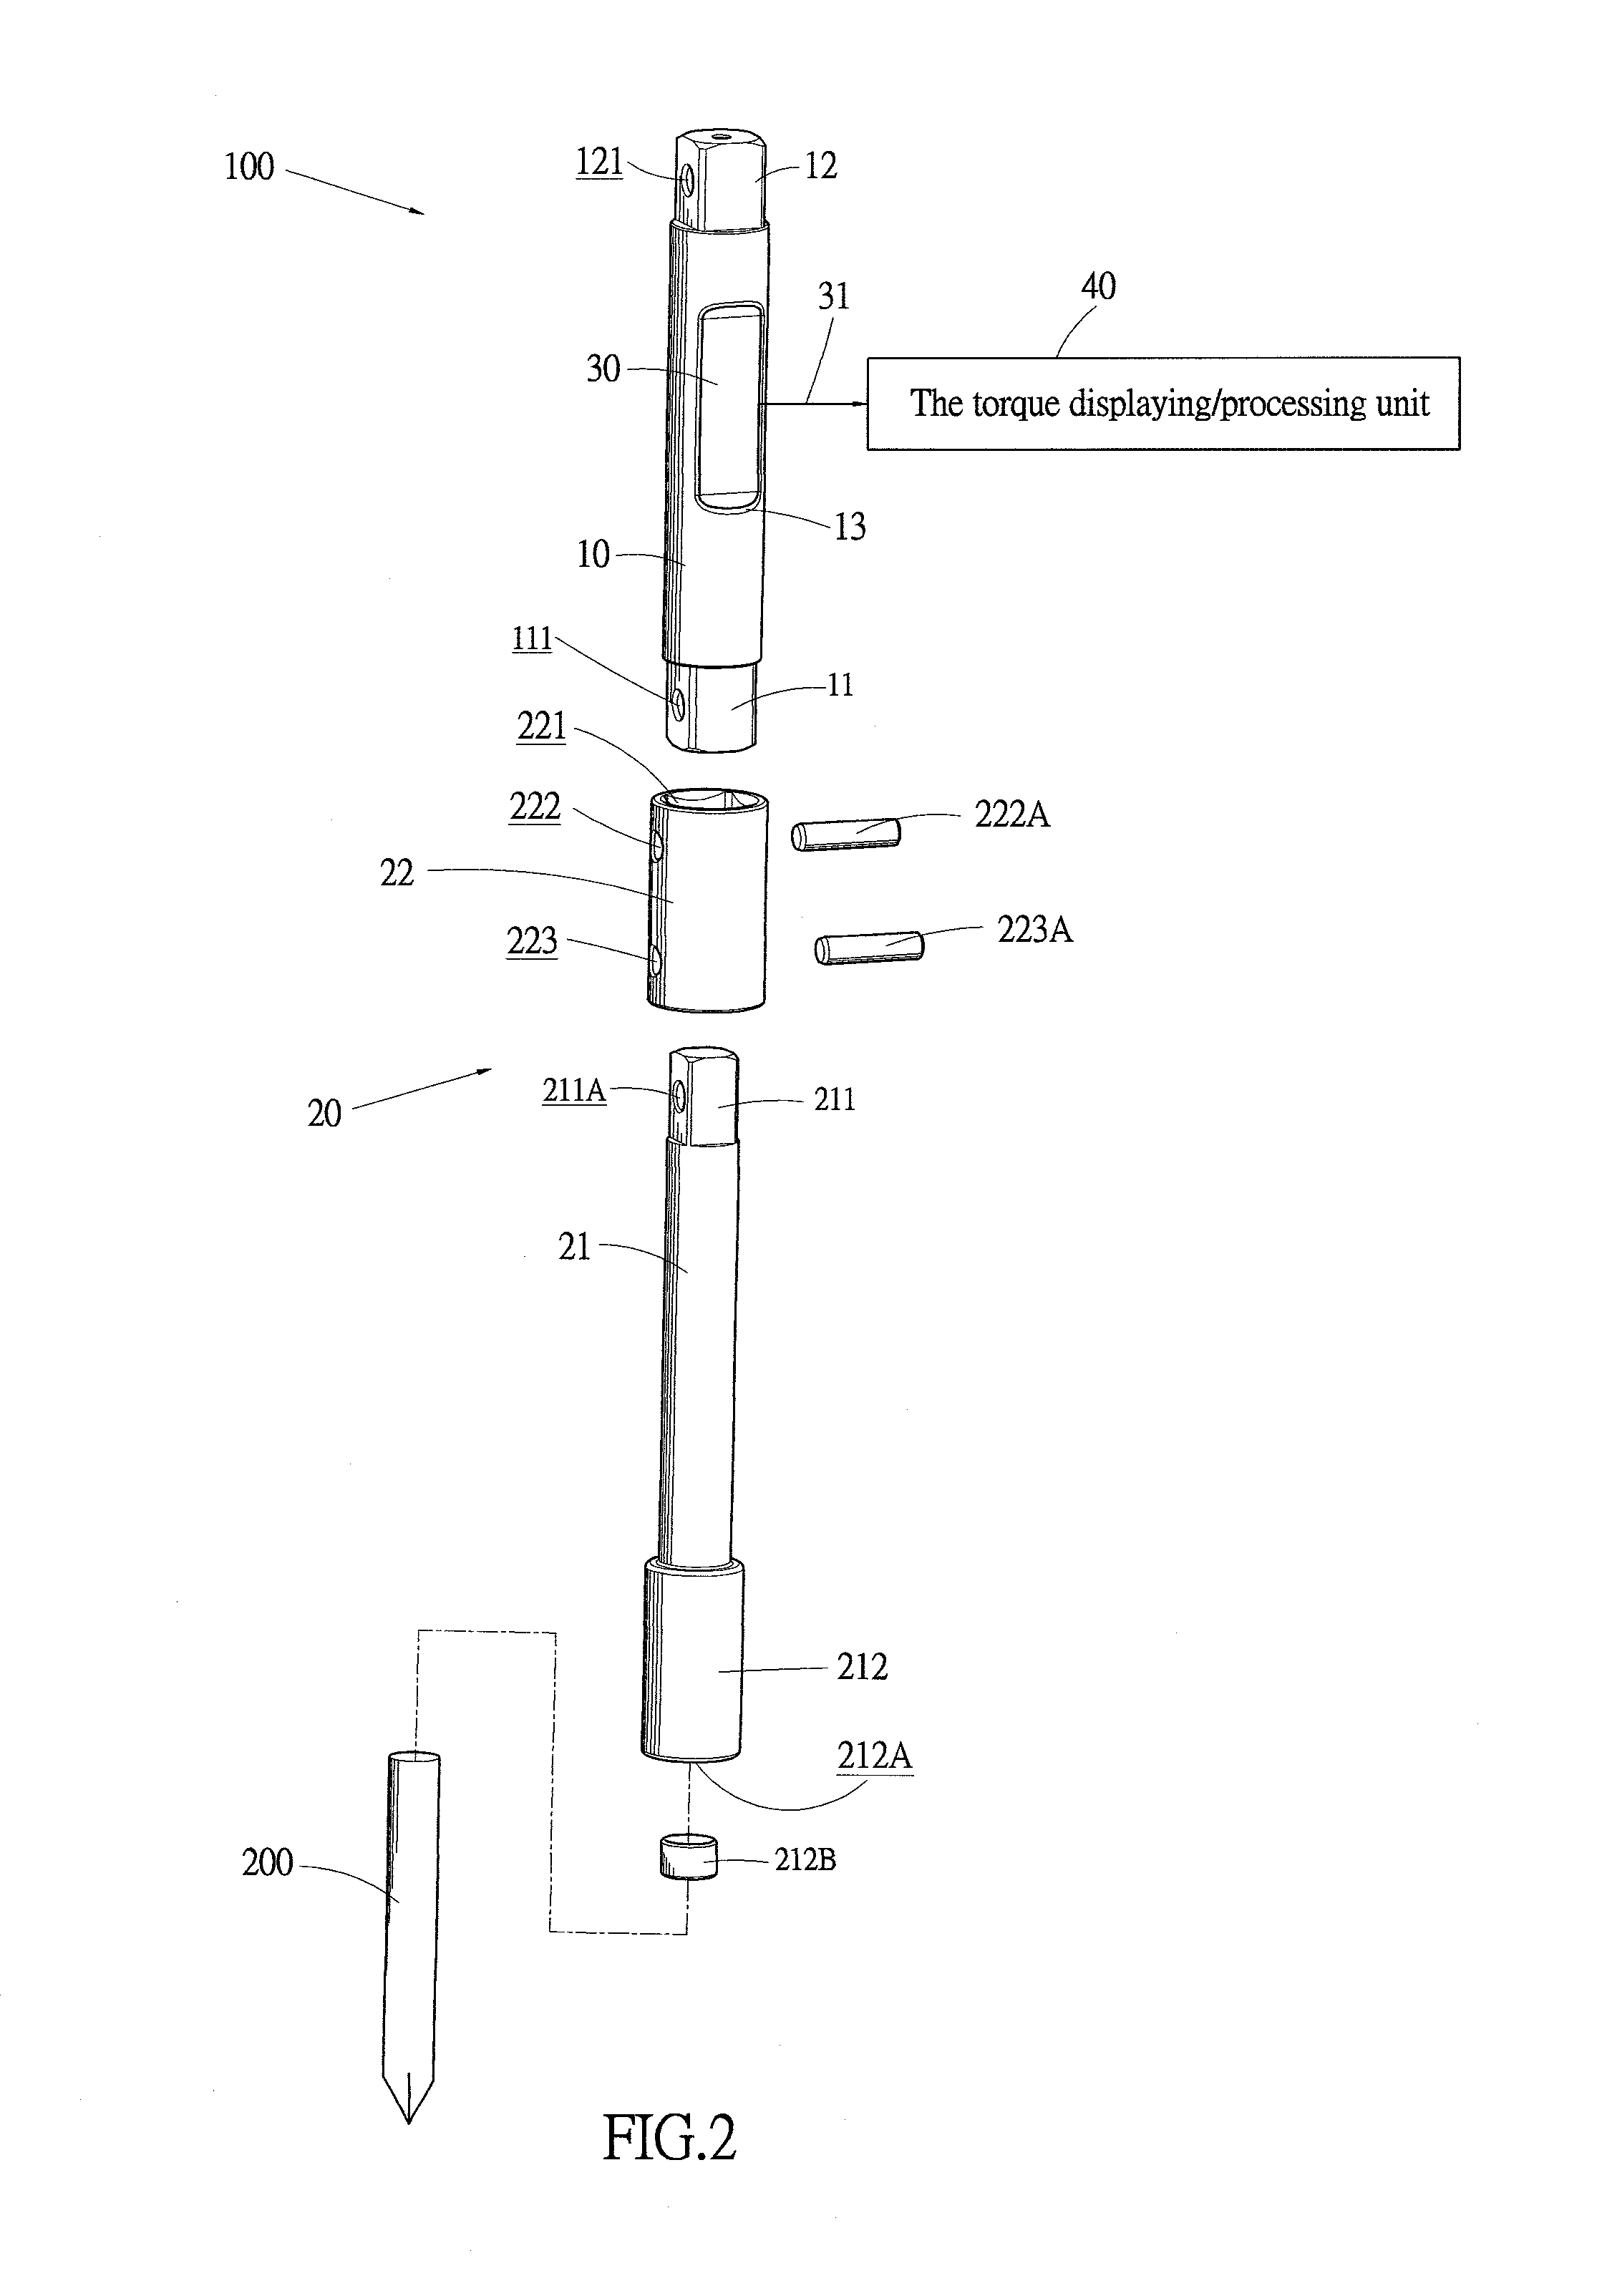 Torque detection device for tool